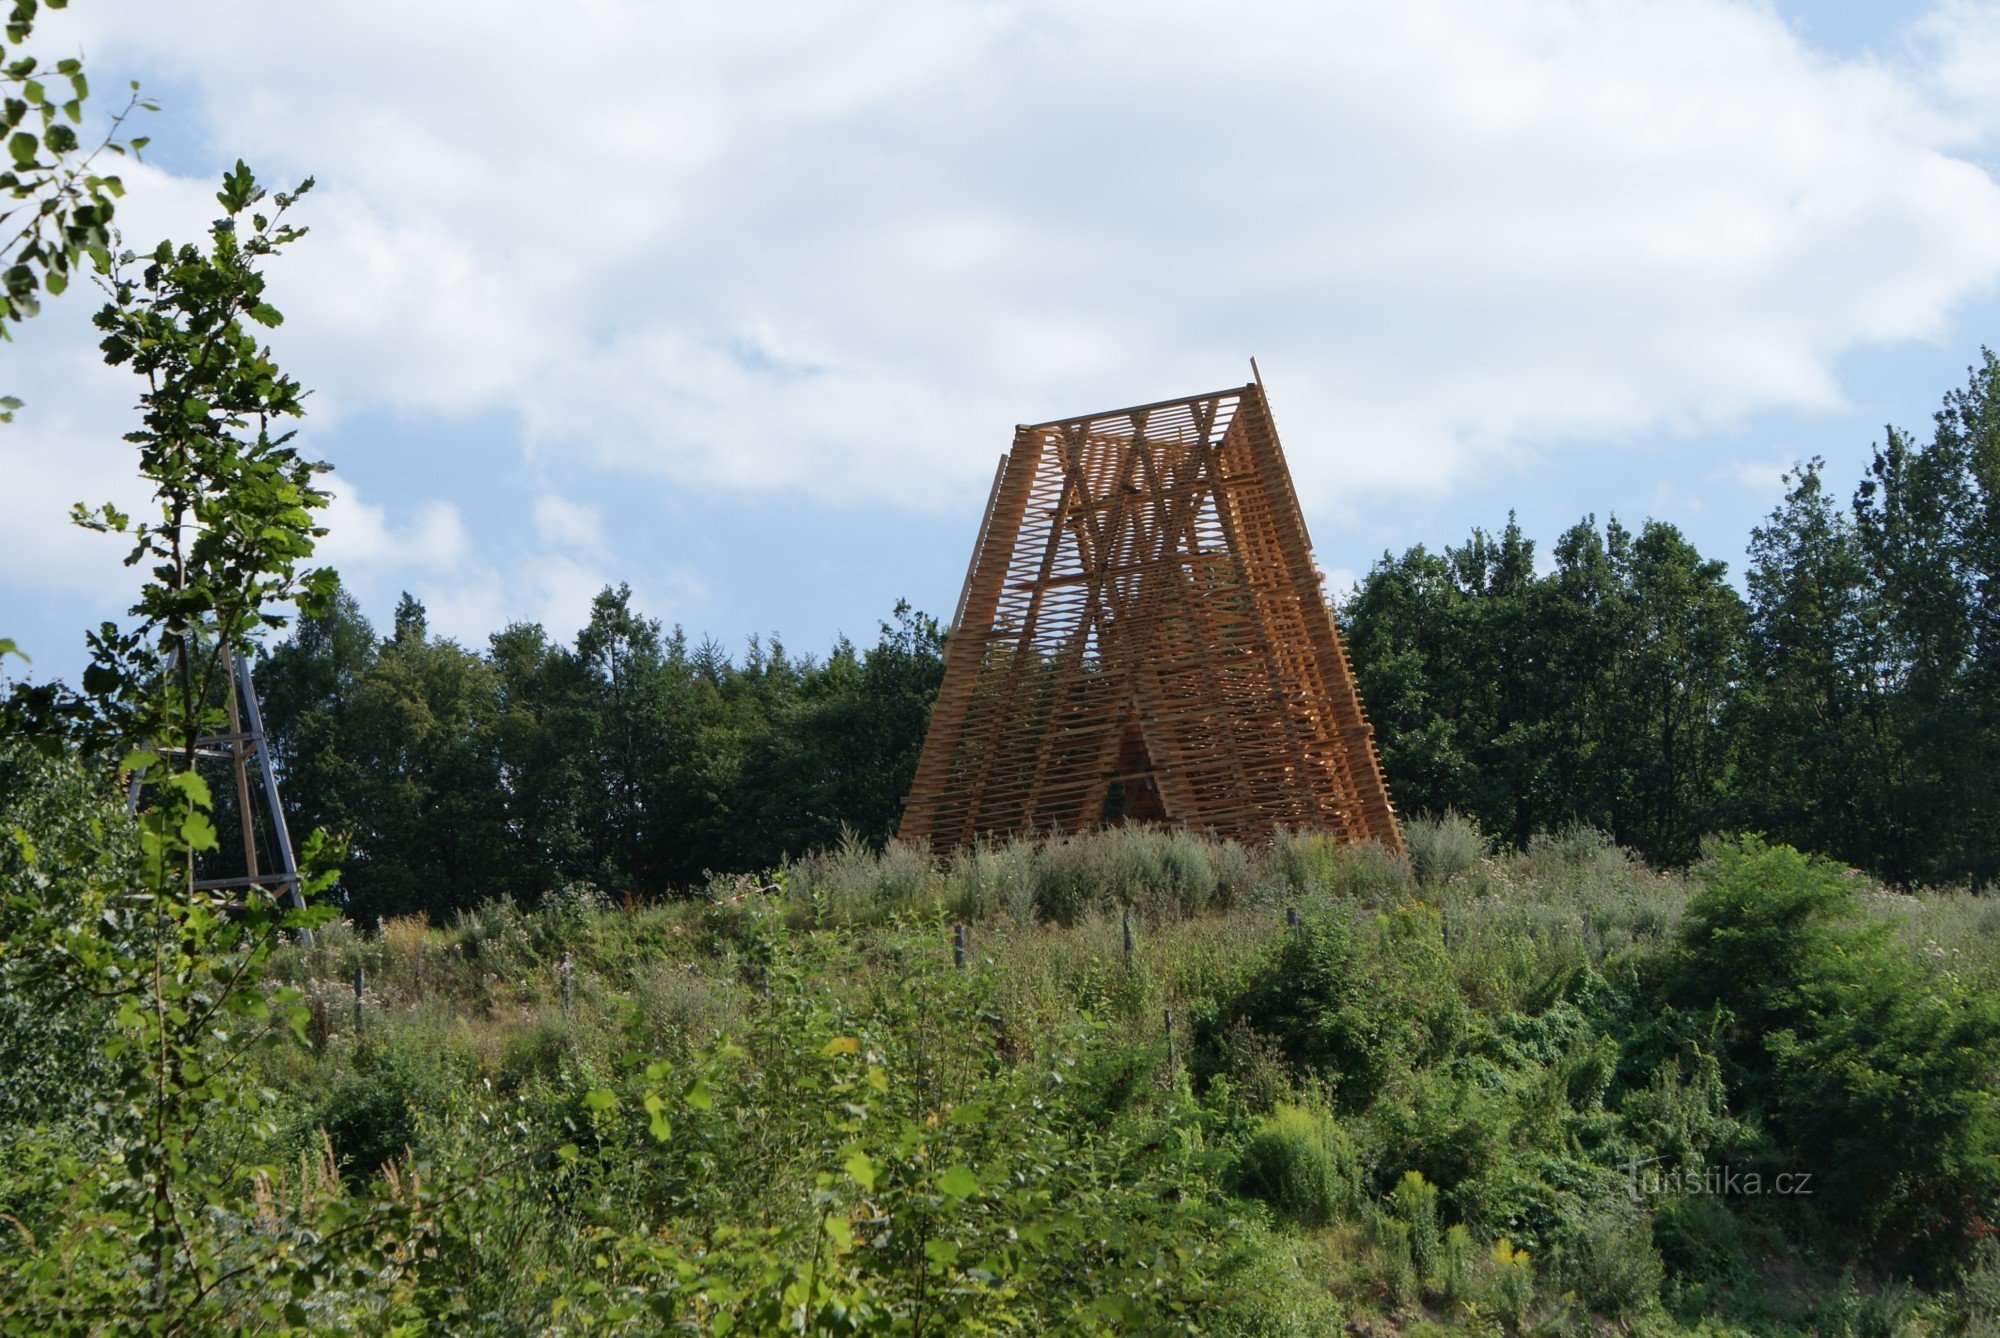 Bára lookout tower - come and see how it looks today!!!